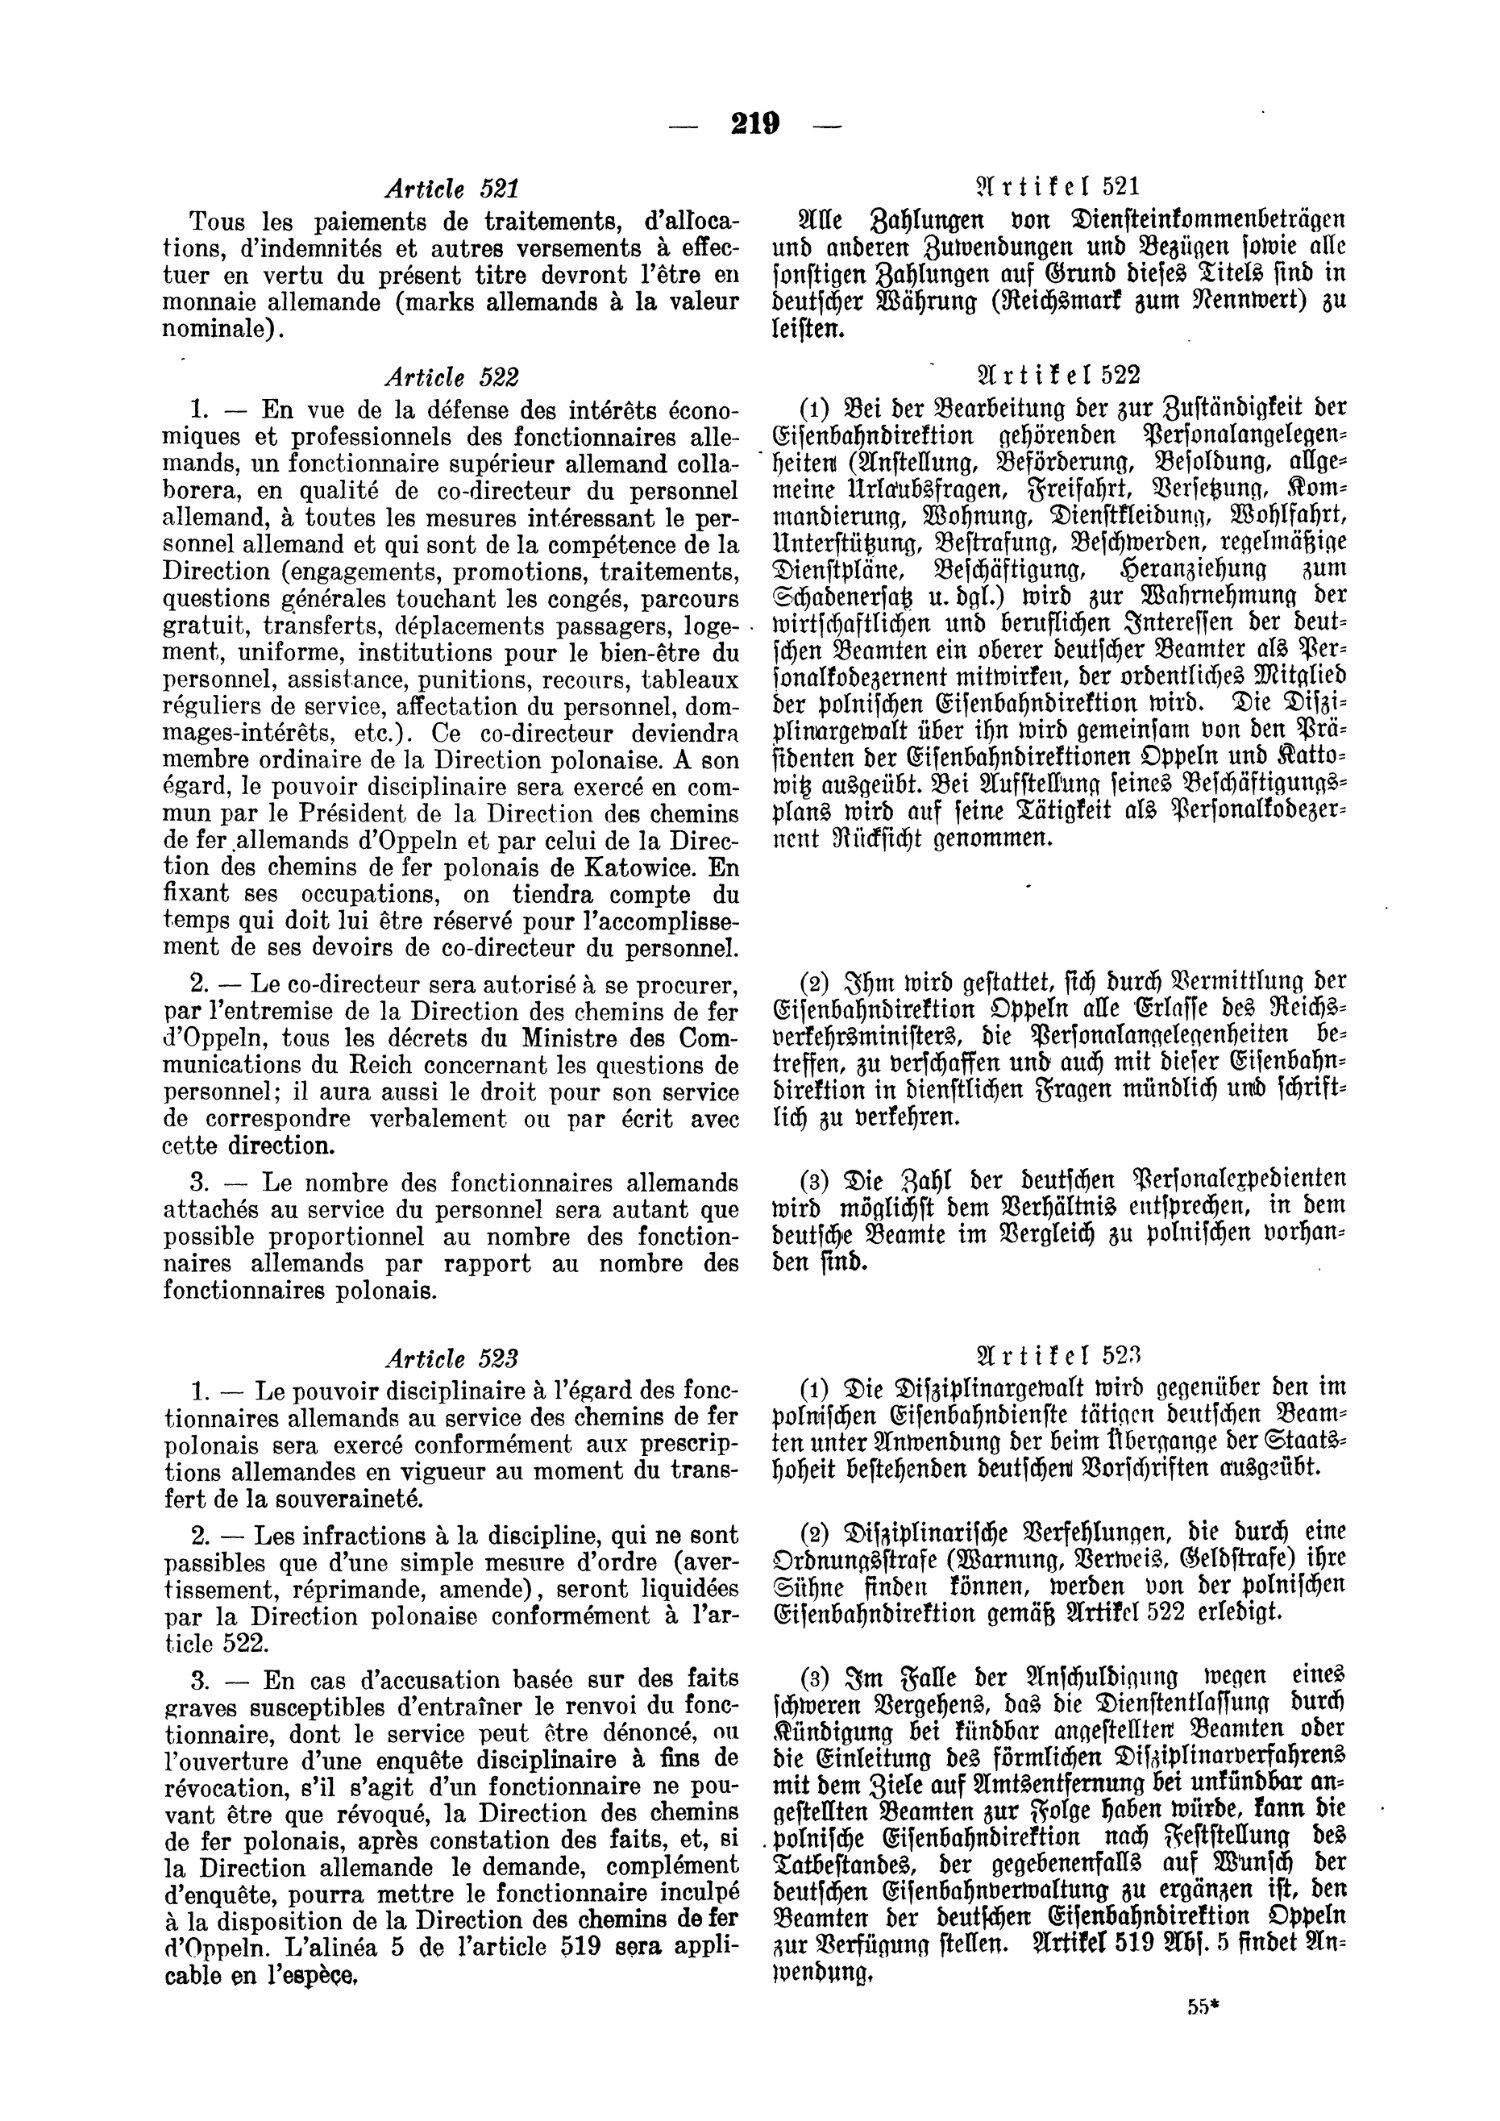 Scan of page 219